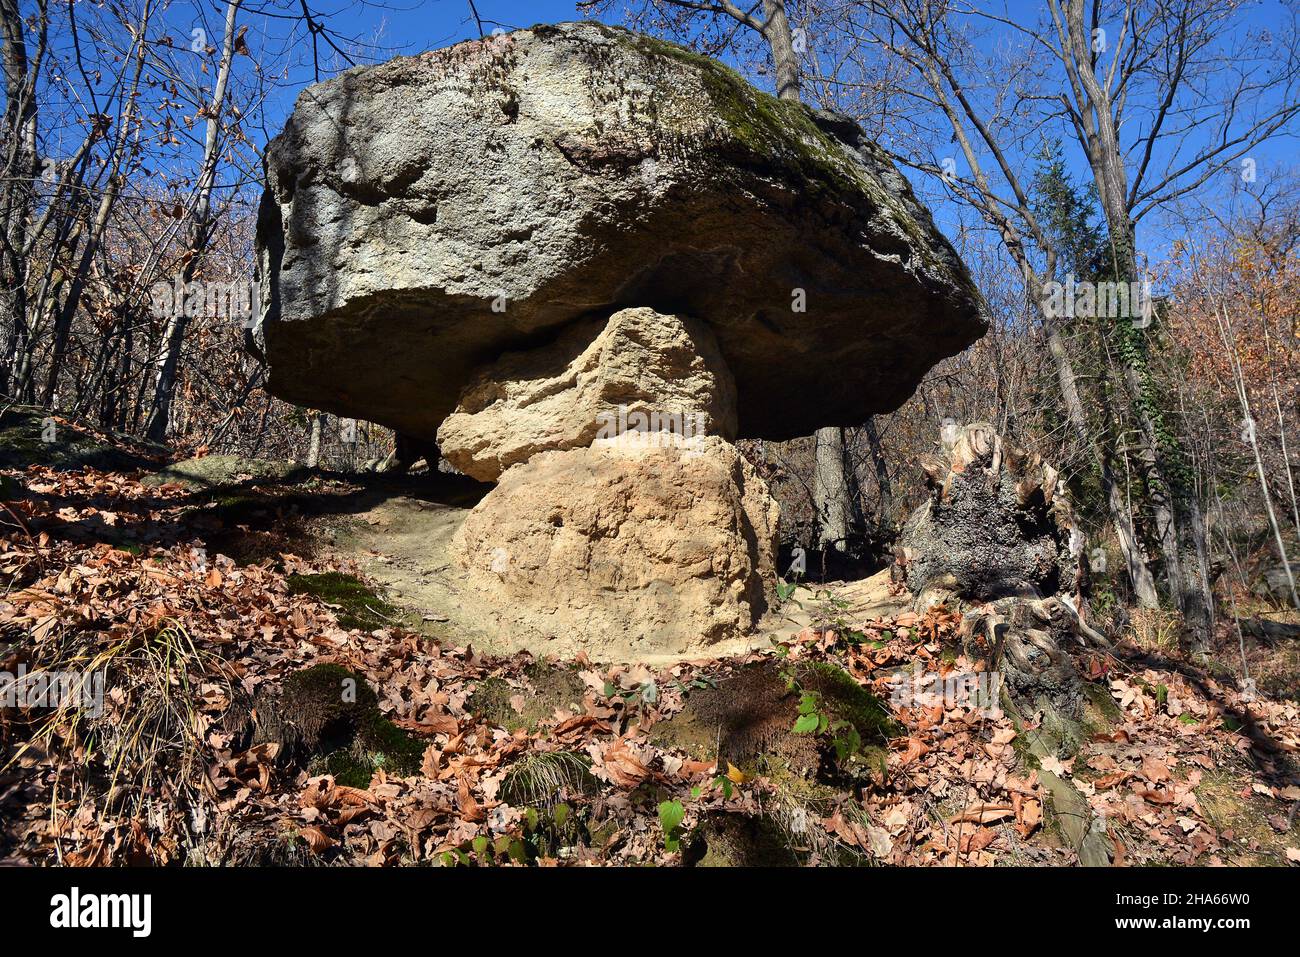 Villar San Costanzo, Piedmont, Italy - The Ciciu di Villar nature reserve where there are geological formations in the shape of mushrooms, due to wate Stock Photo